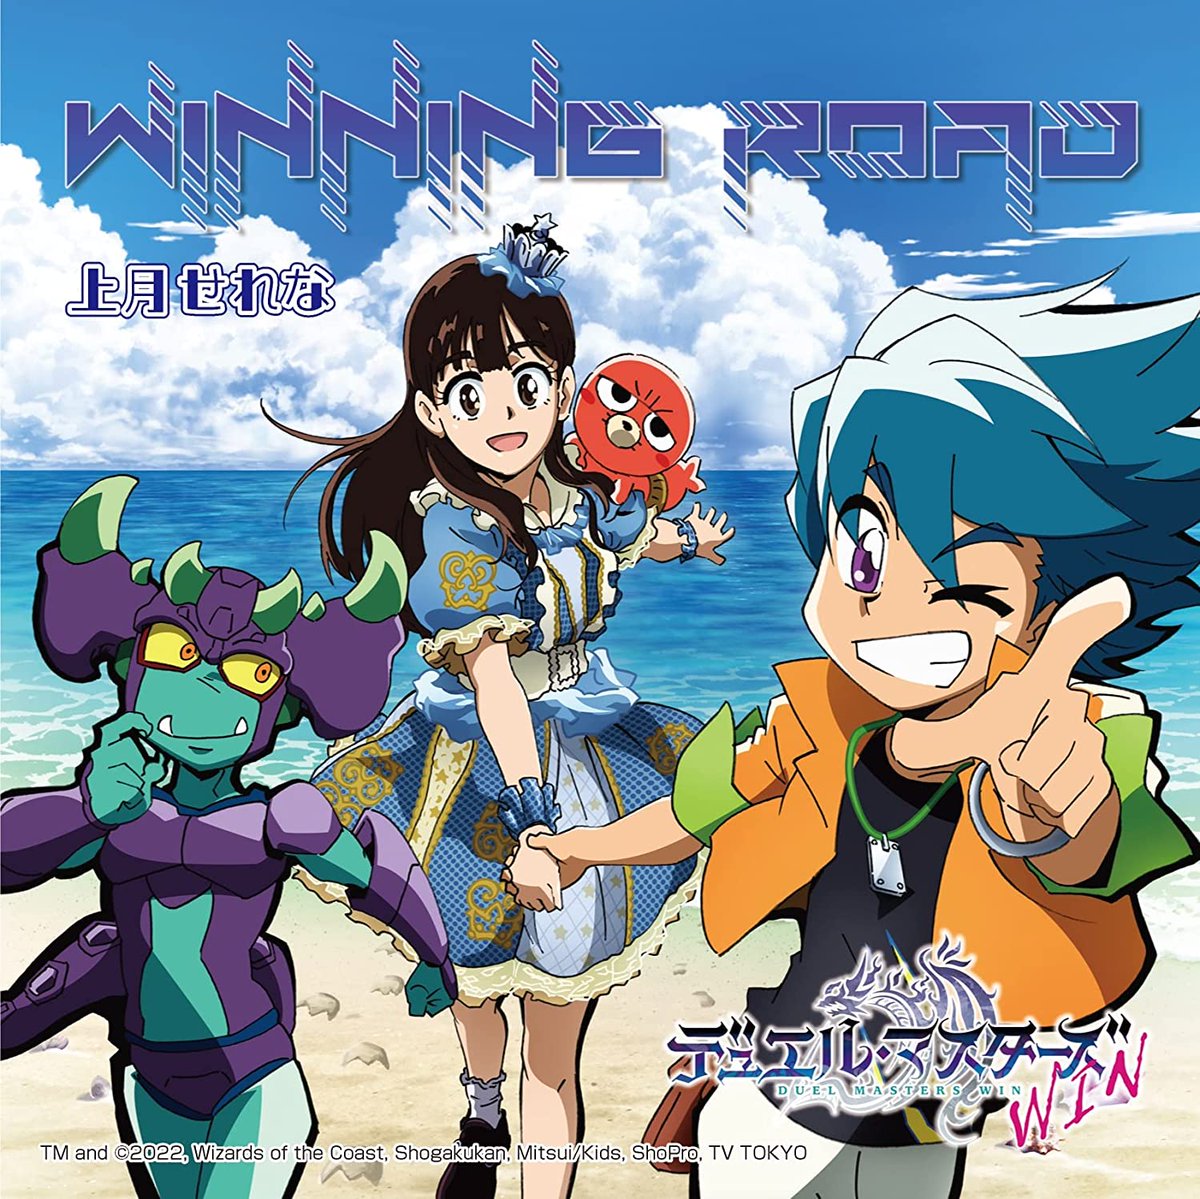 Cover art for『Serena Kozuki - WINNING ROAD』from the release『WINNING ROAD